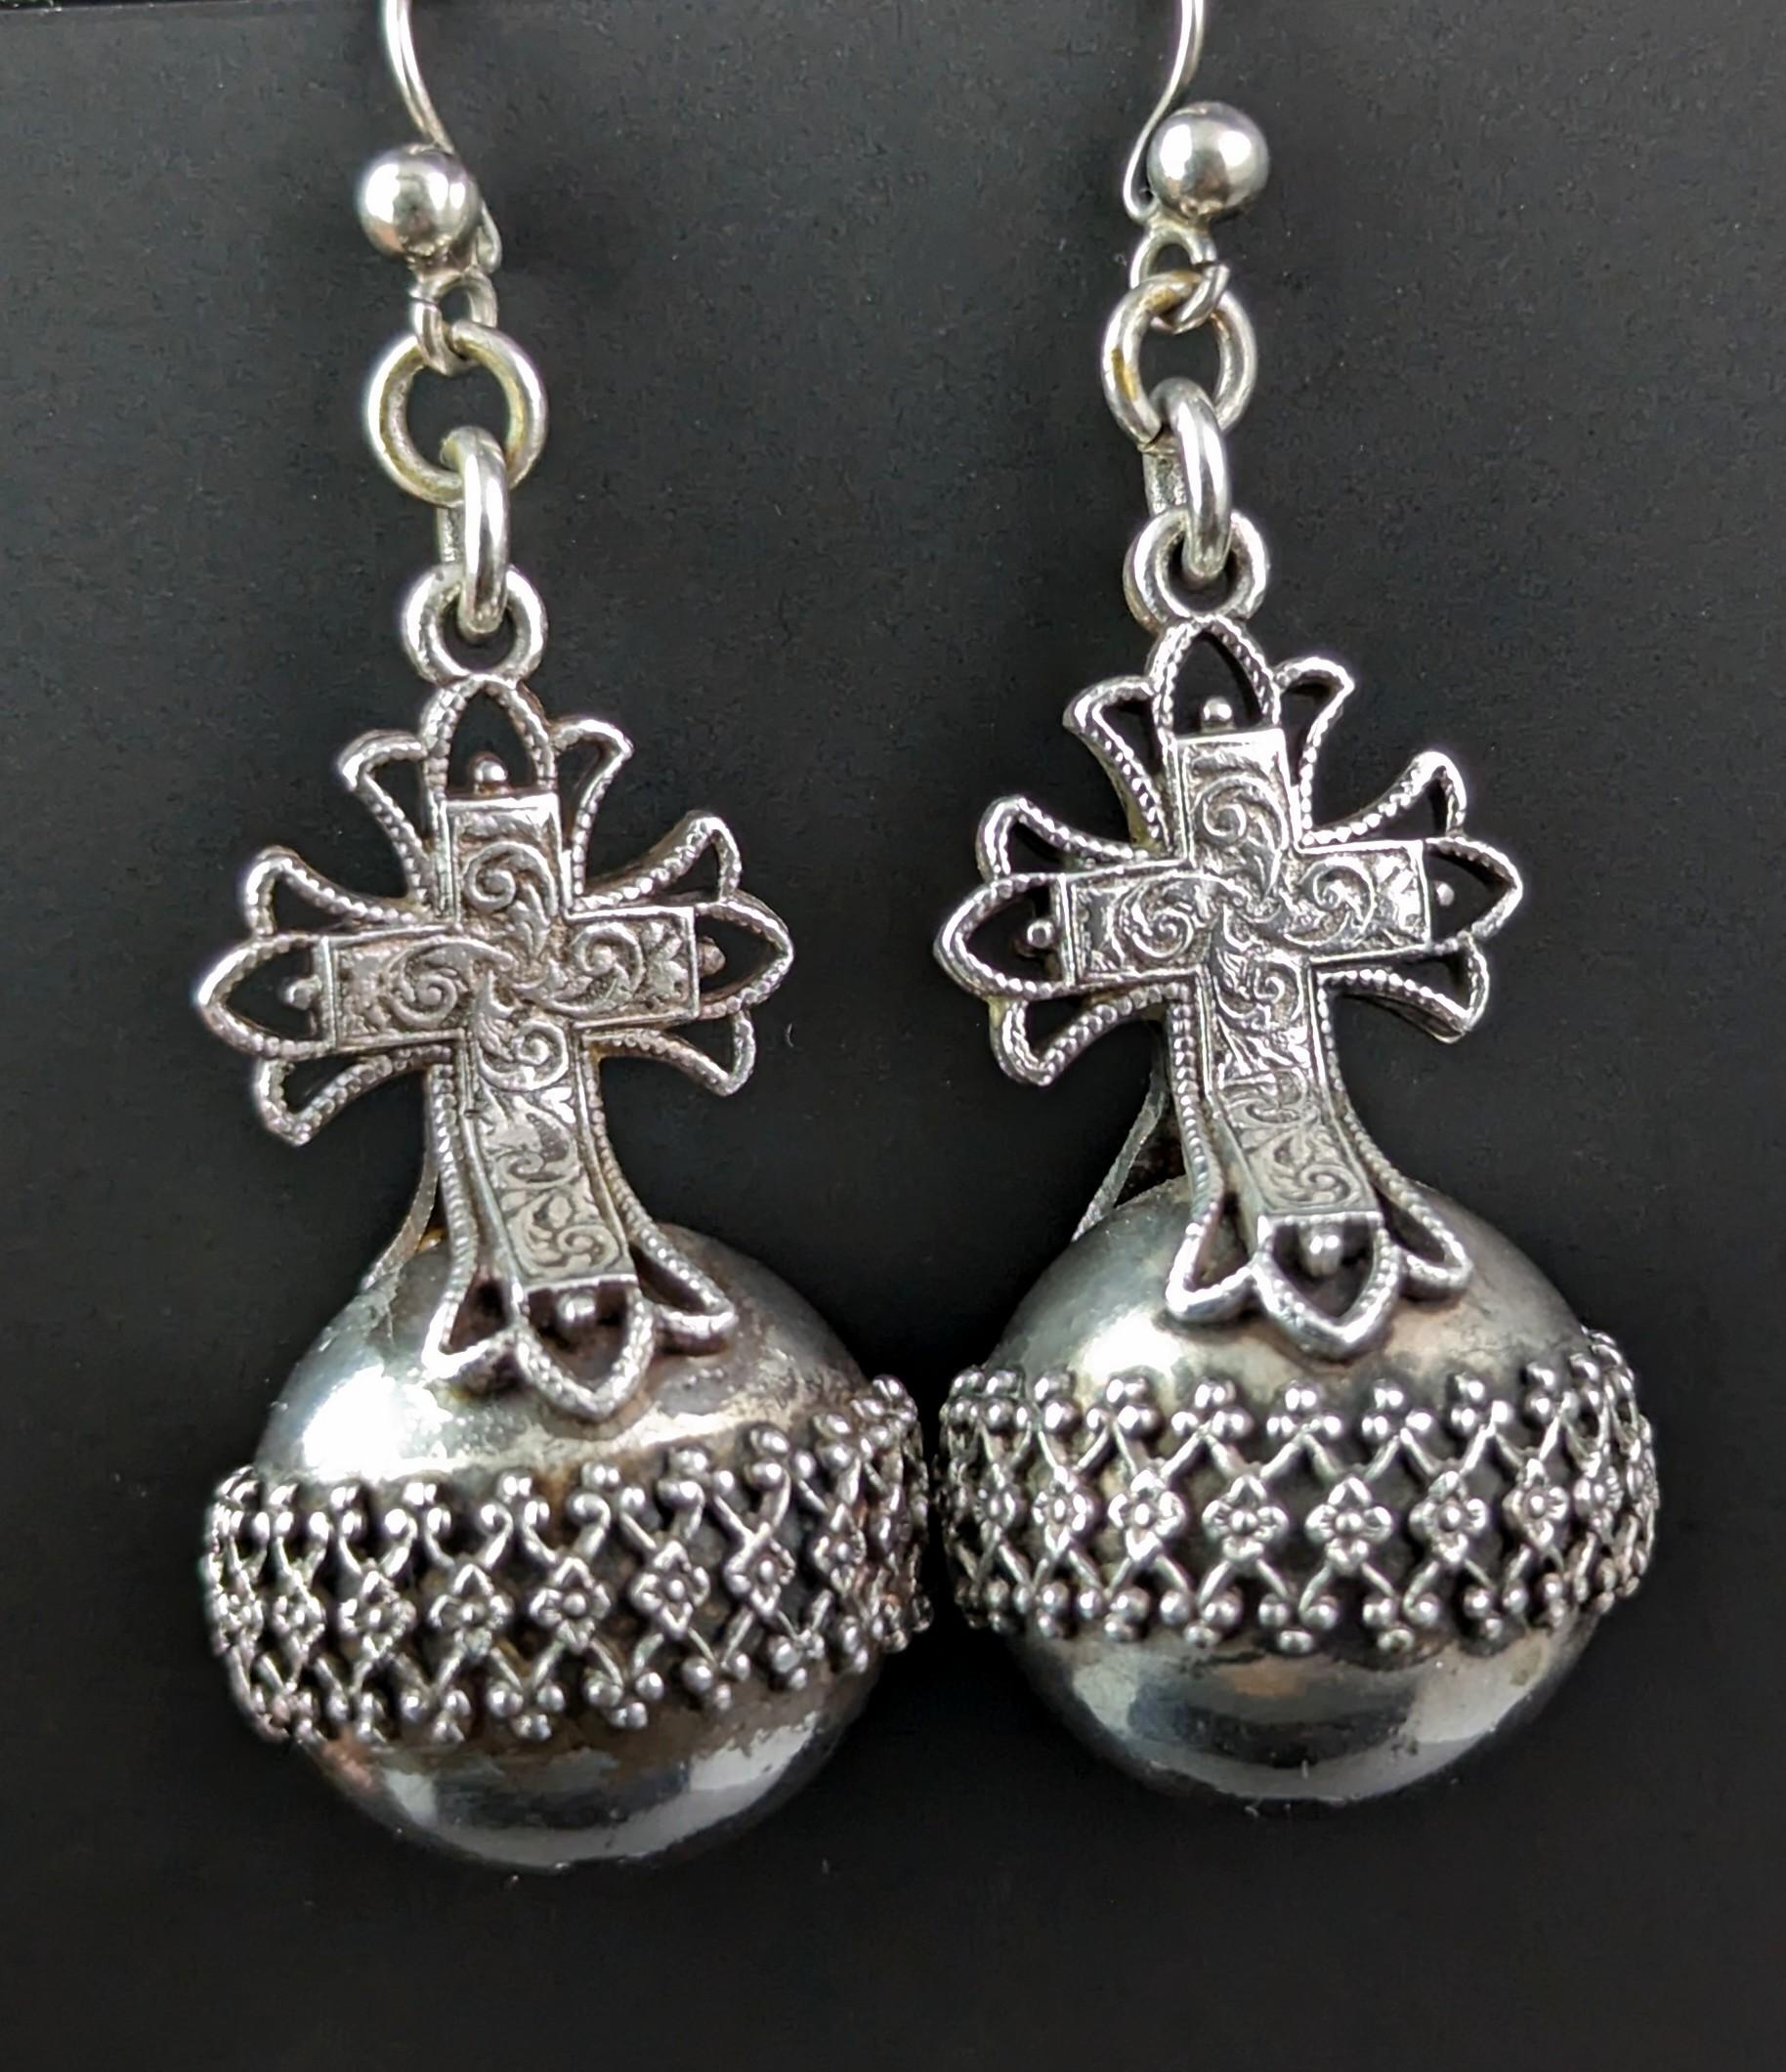 These rare antique Victorian silver earrings are simply divine!

Such fine craftsmanship and attention to detail, they are crafted in sterling silver and designed in the Etruscan revival manner as a Globus Cruciger or cross and orb.

The main body